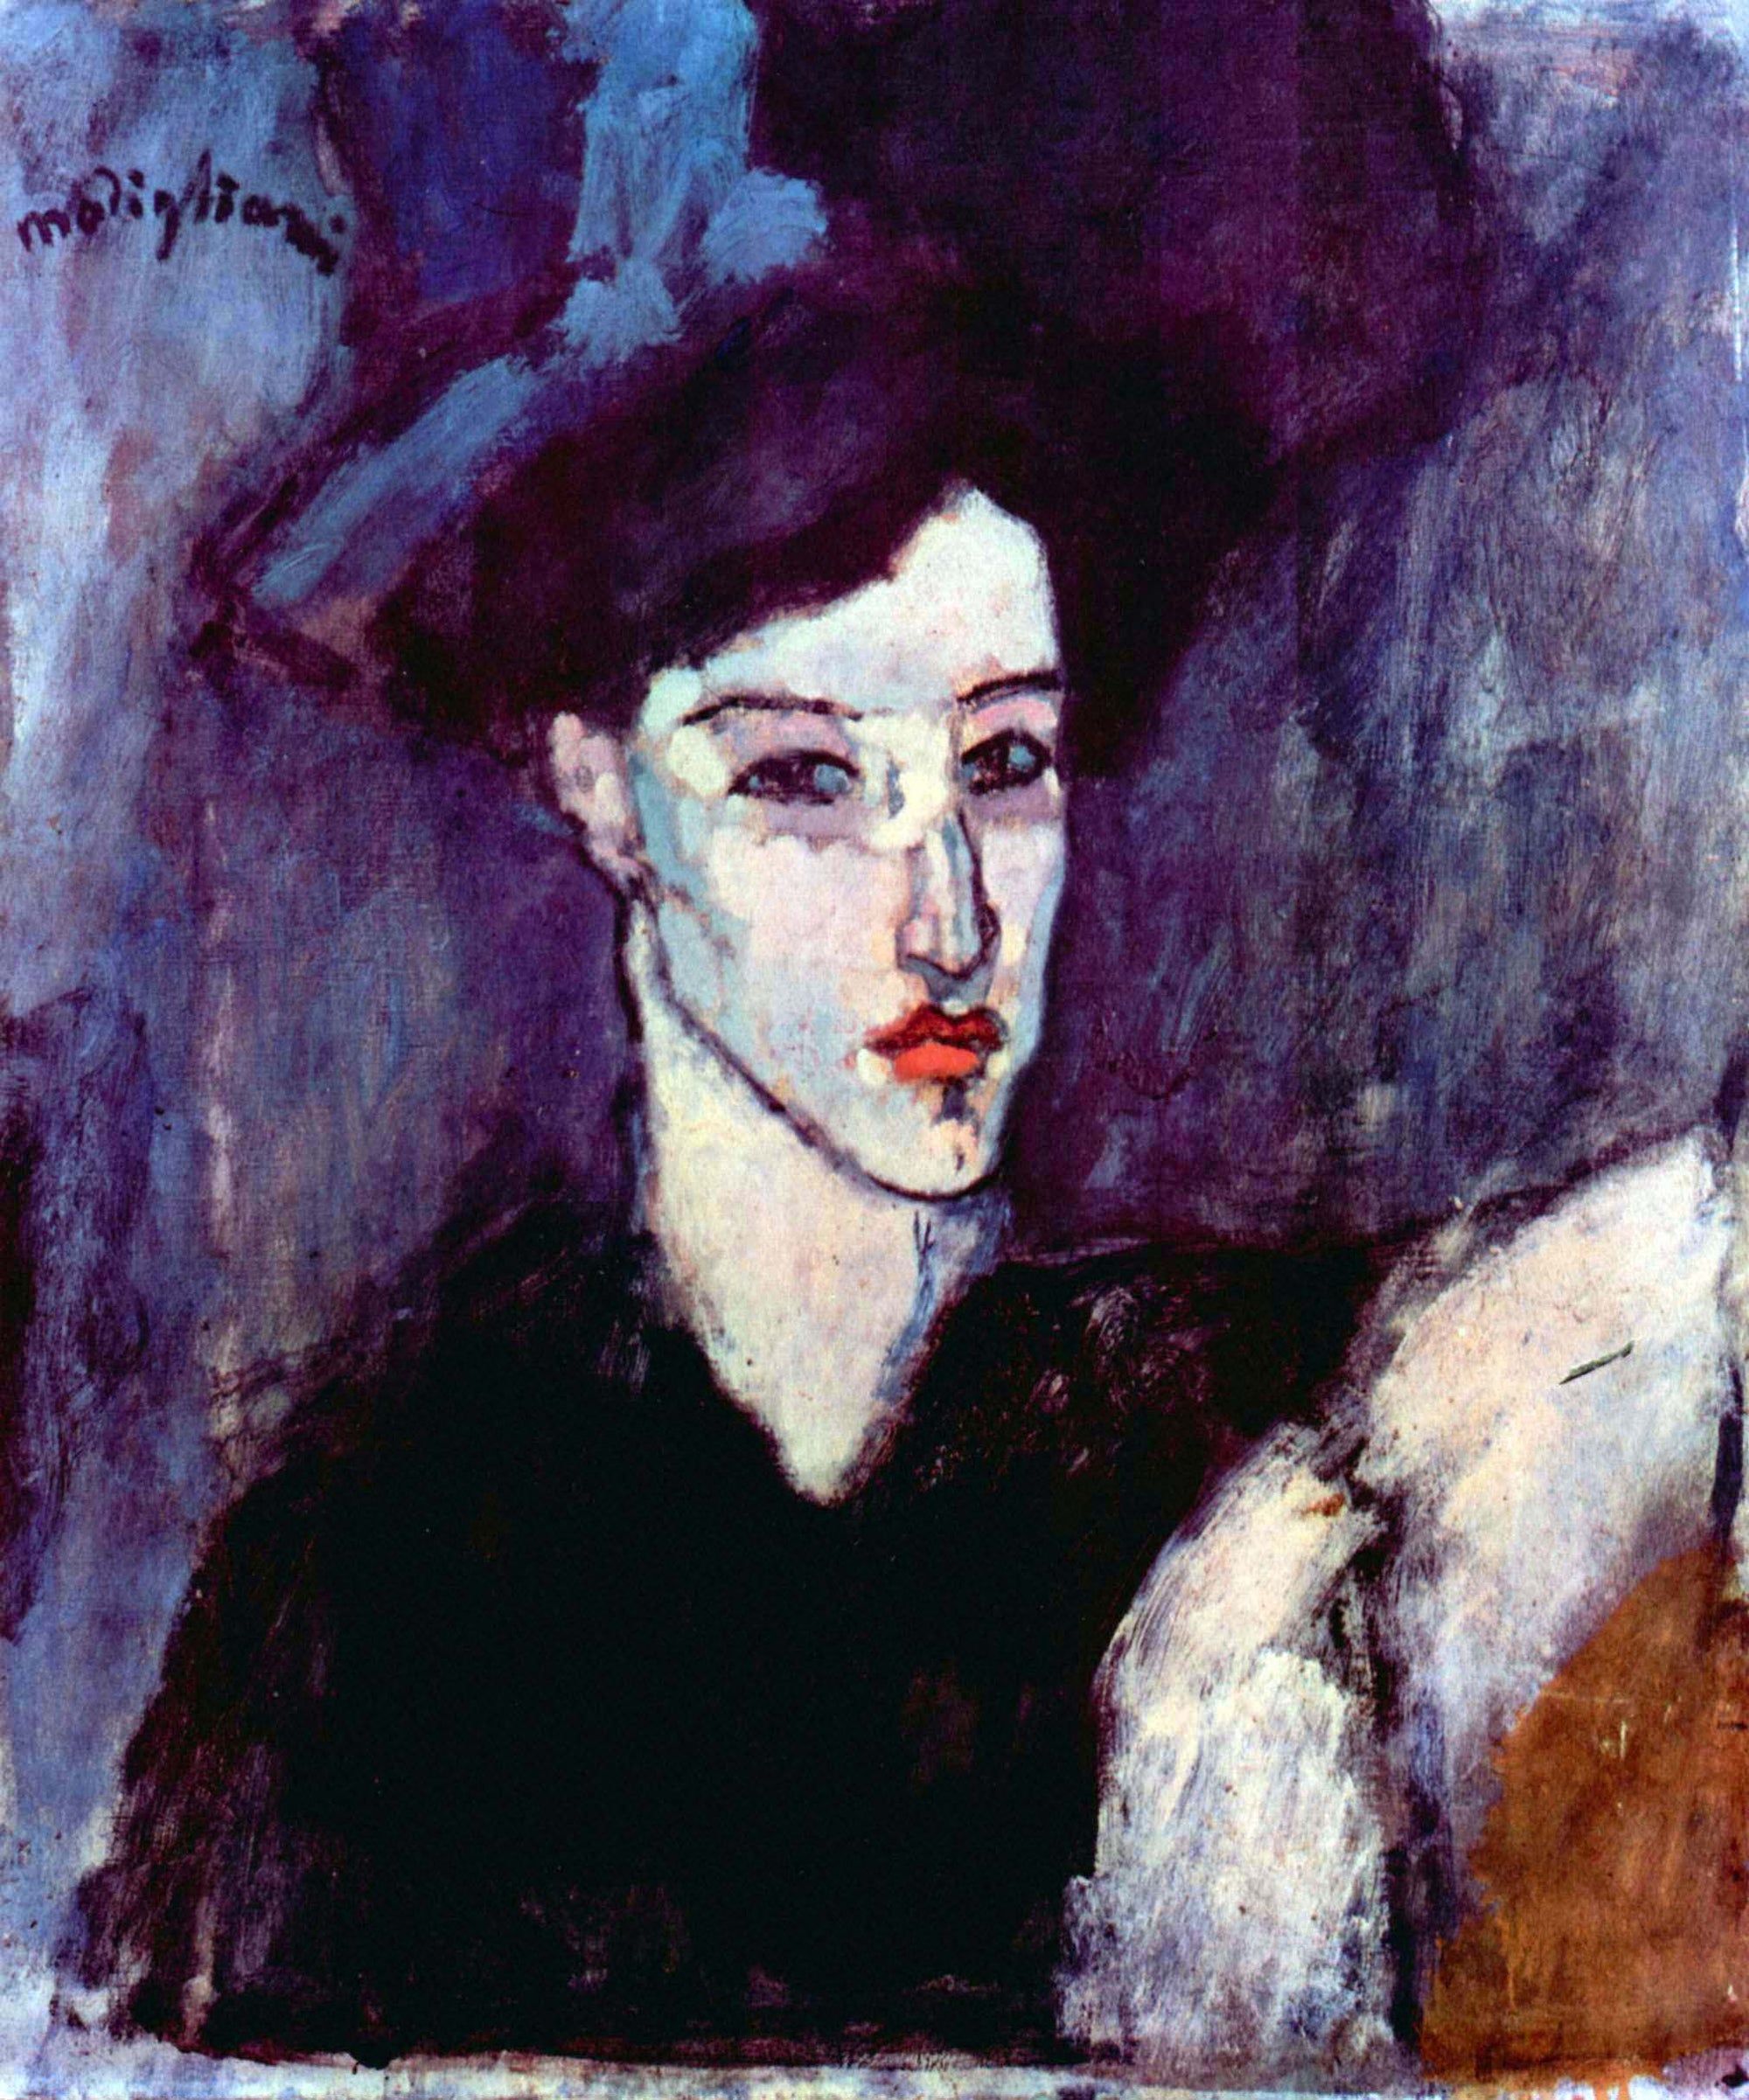 Going To The Tate Modern Modigliani Exhibition? Dig This Modigli Minute